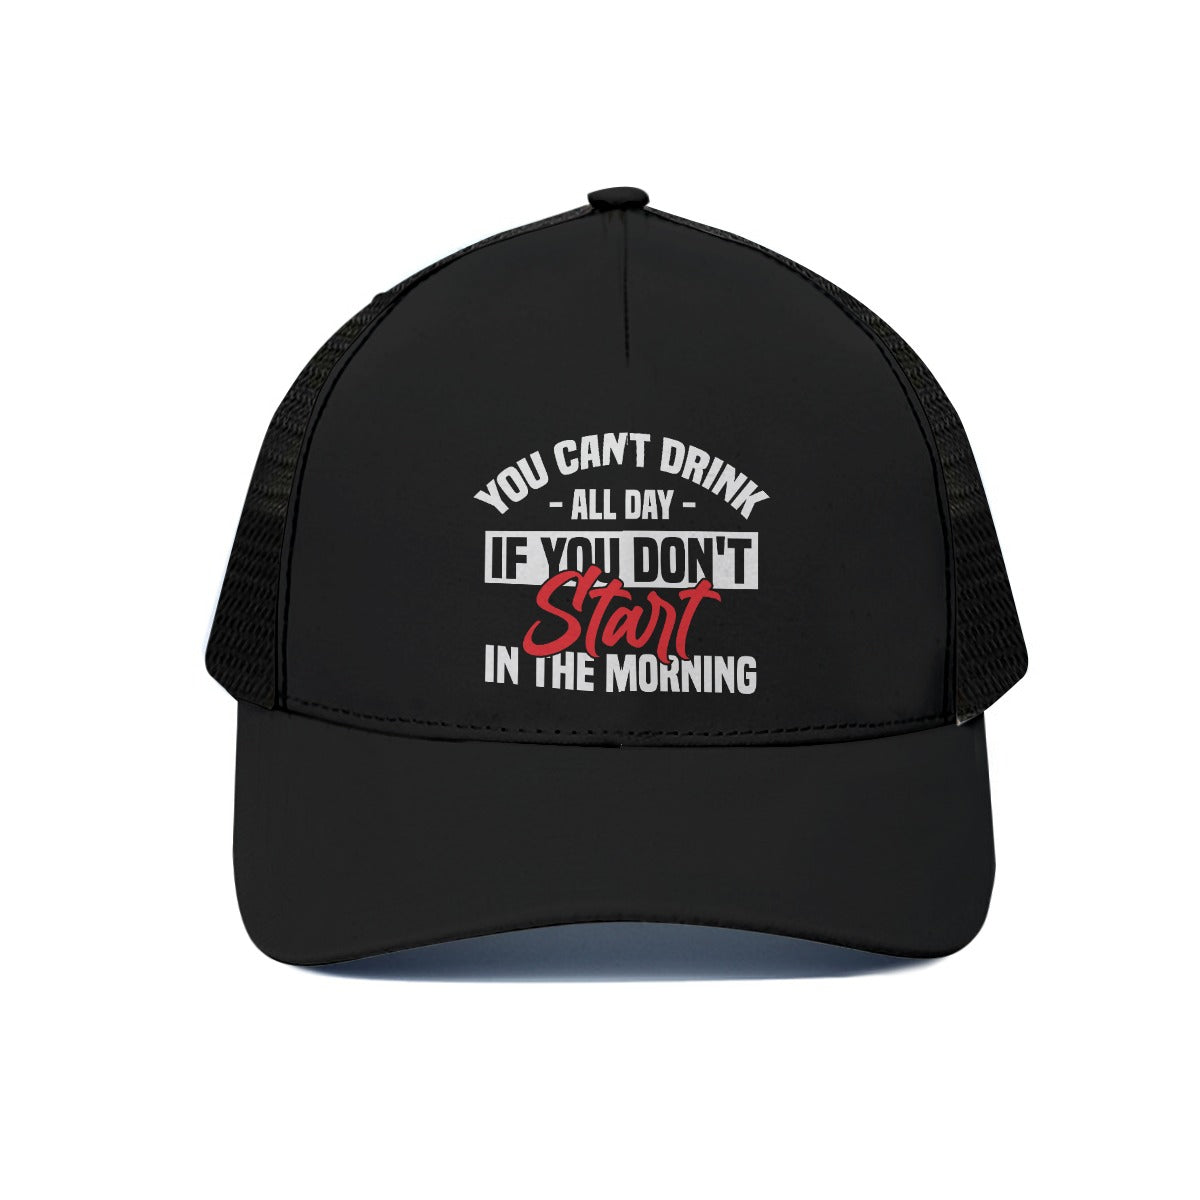 TRUCKER HAT - You can't drink all day unless you start in the morning